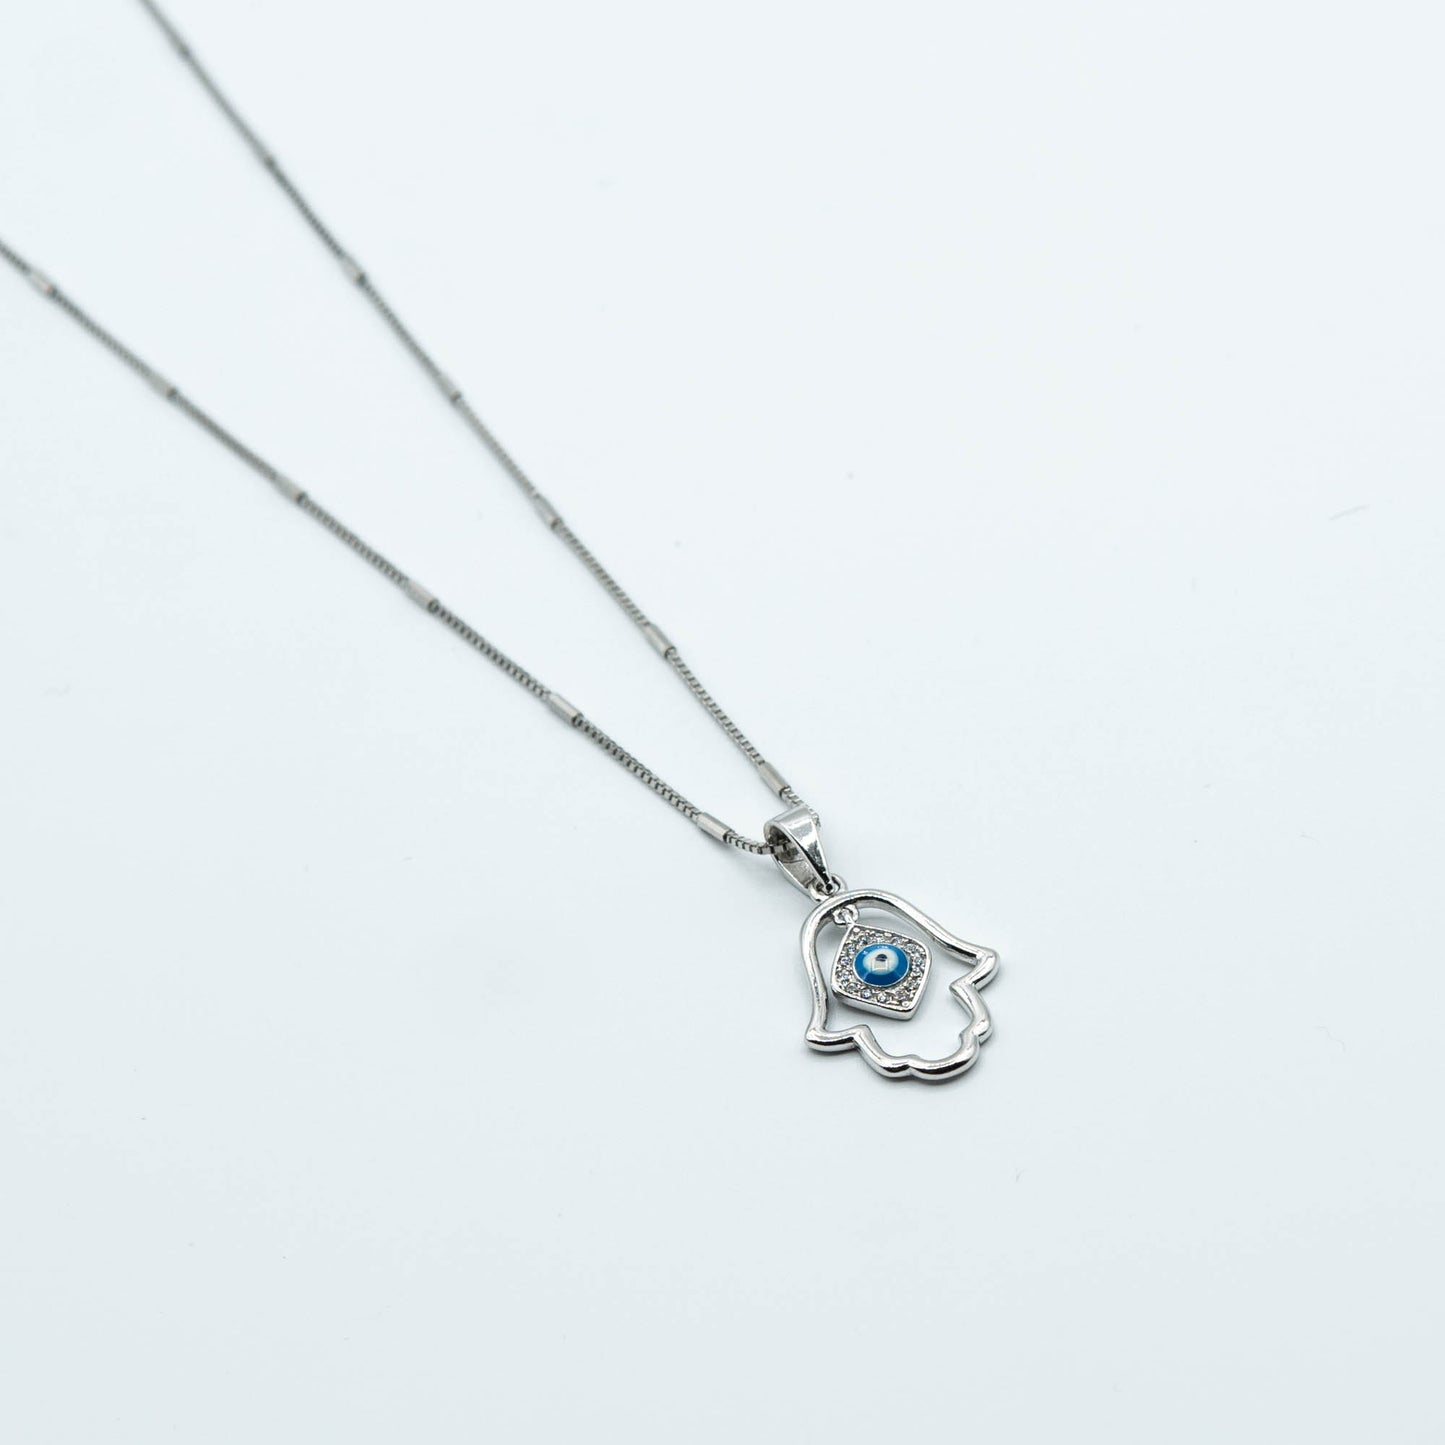 TANYA - sterling silver hamsa necklace with eye